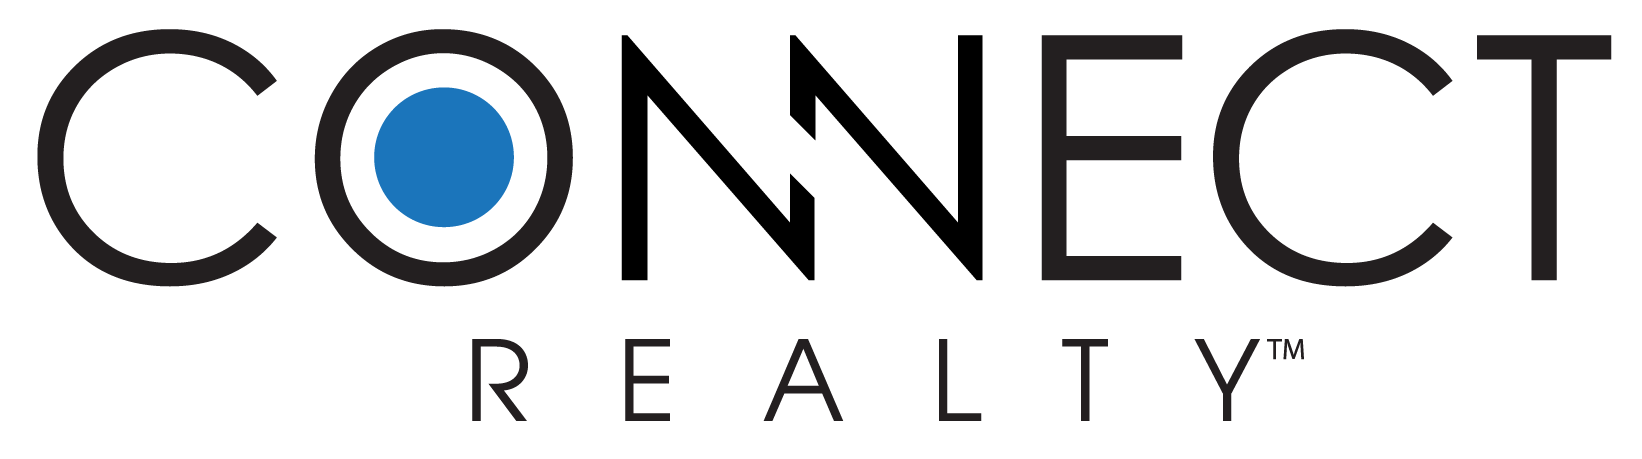 Connect Realty RI